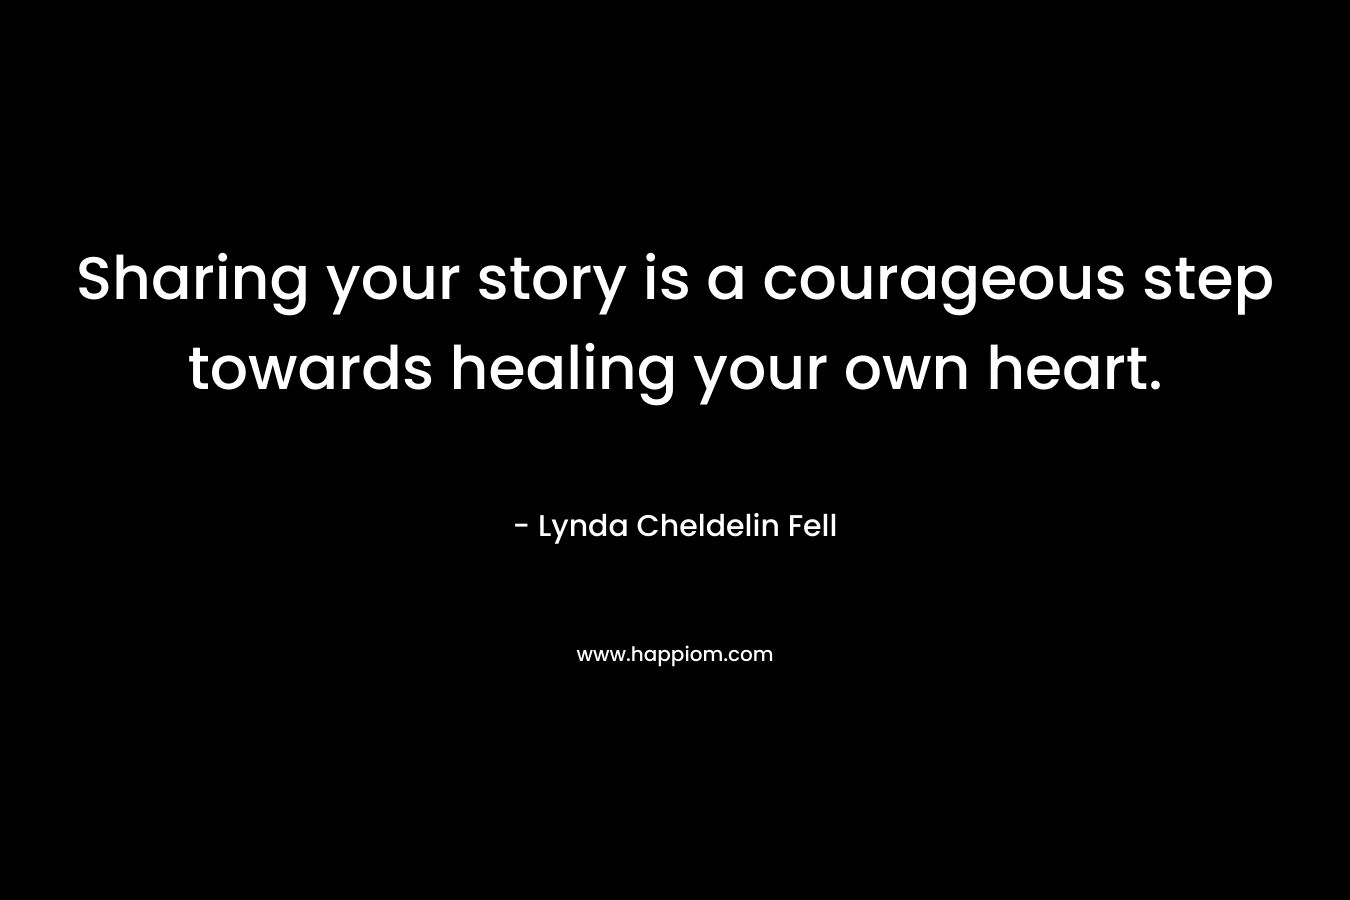 Sharing your story is a courageous step towards healing your own heart. – Lynda Cheldelin Fell